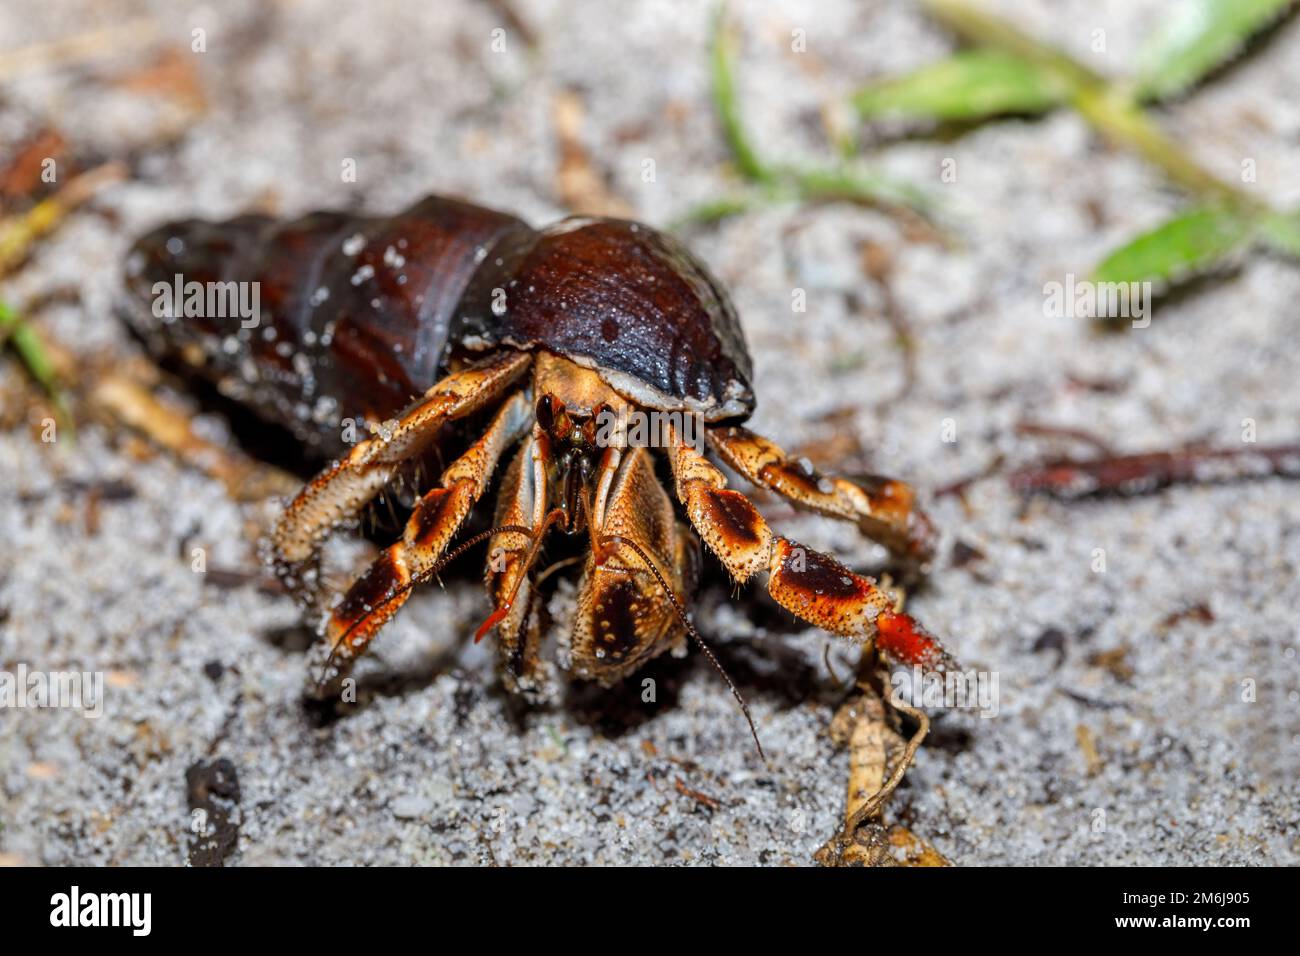 Hermit crab with snail shell Madagascar Stock Photo